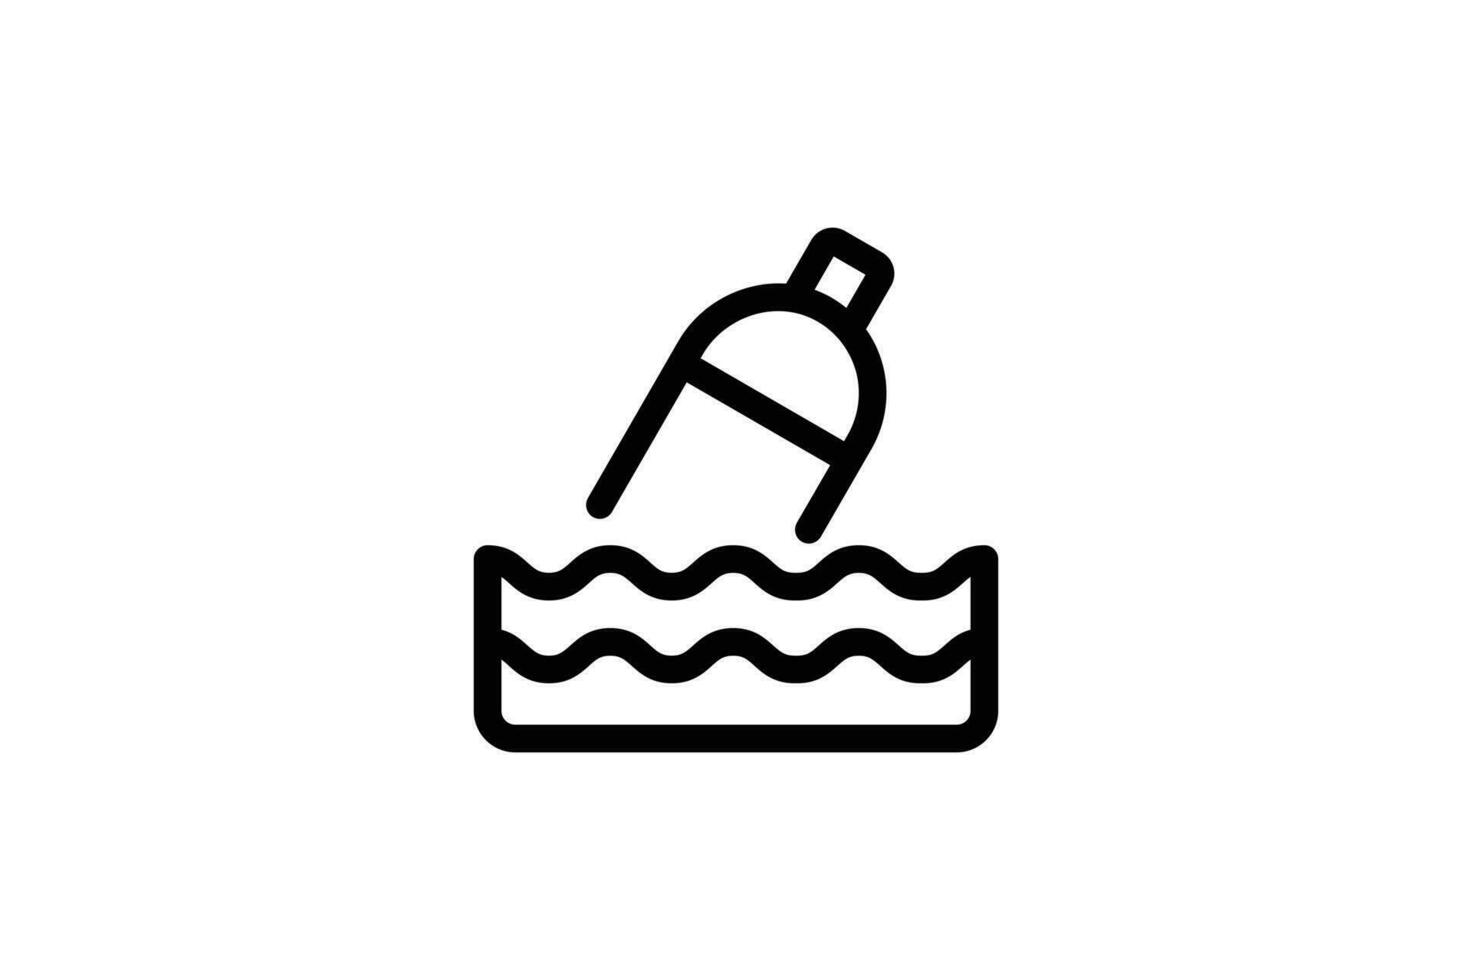 Plastic bottle icon pollution line style free vector